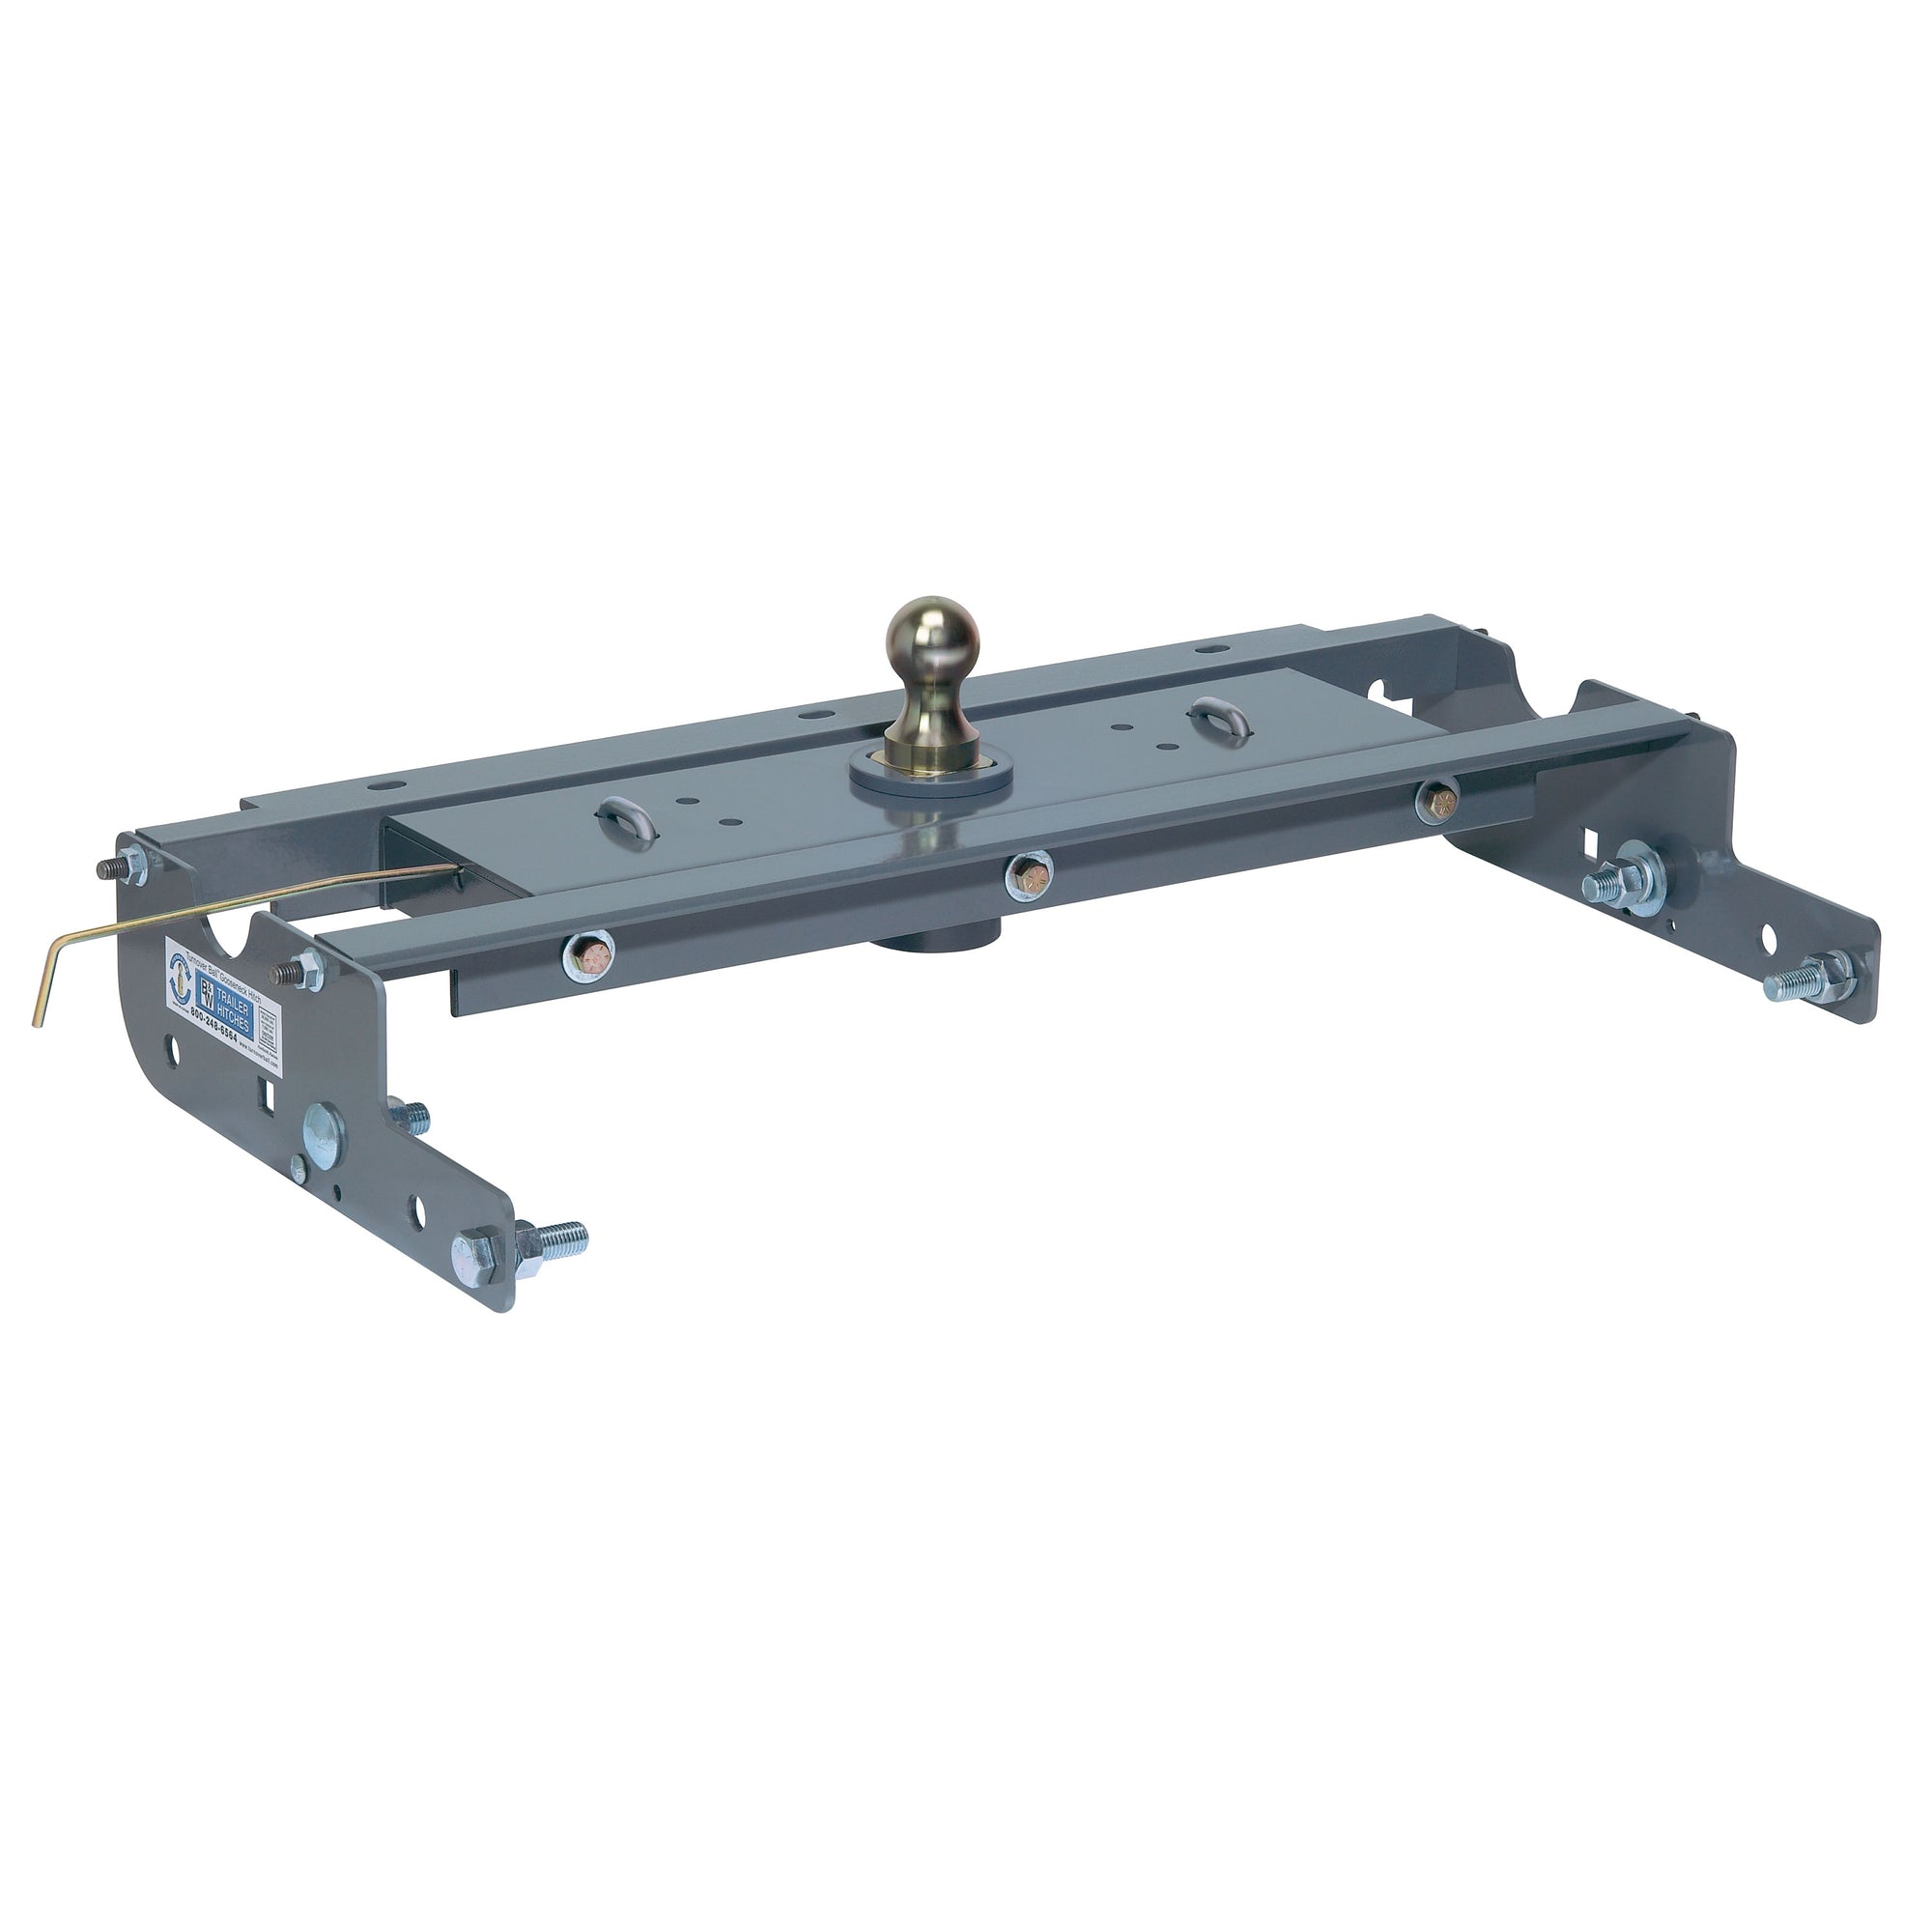 B&W Trailer Hitches GNRK1000 Turnoverball Gooseneck Hitch for Chevrolet/GMC 1/2, 3/4, 1-Ton Long Bed (1988-1998) & 3/4, 1-Ton Old Style Long Bed (1999-2000)